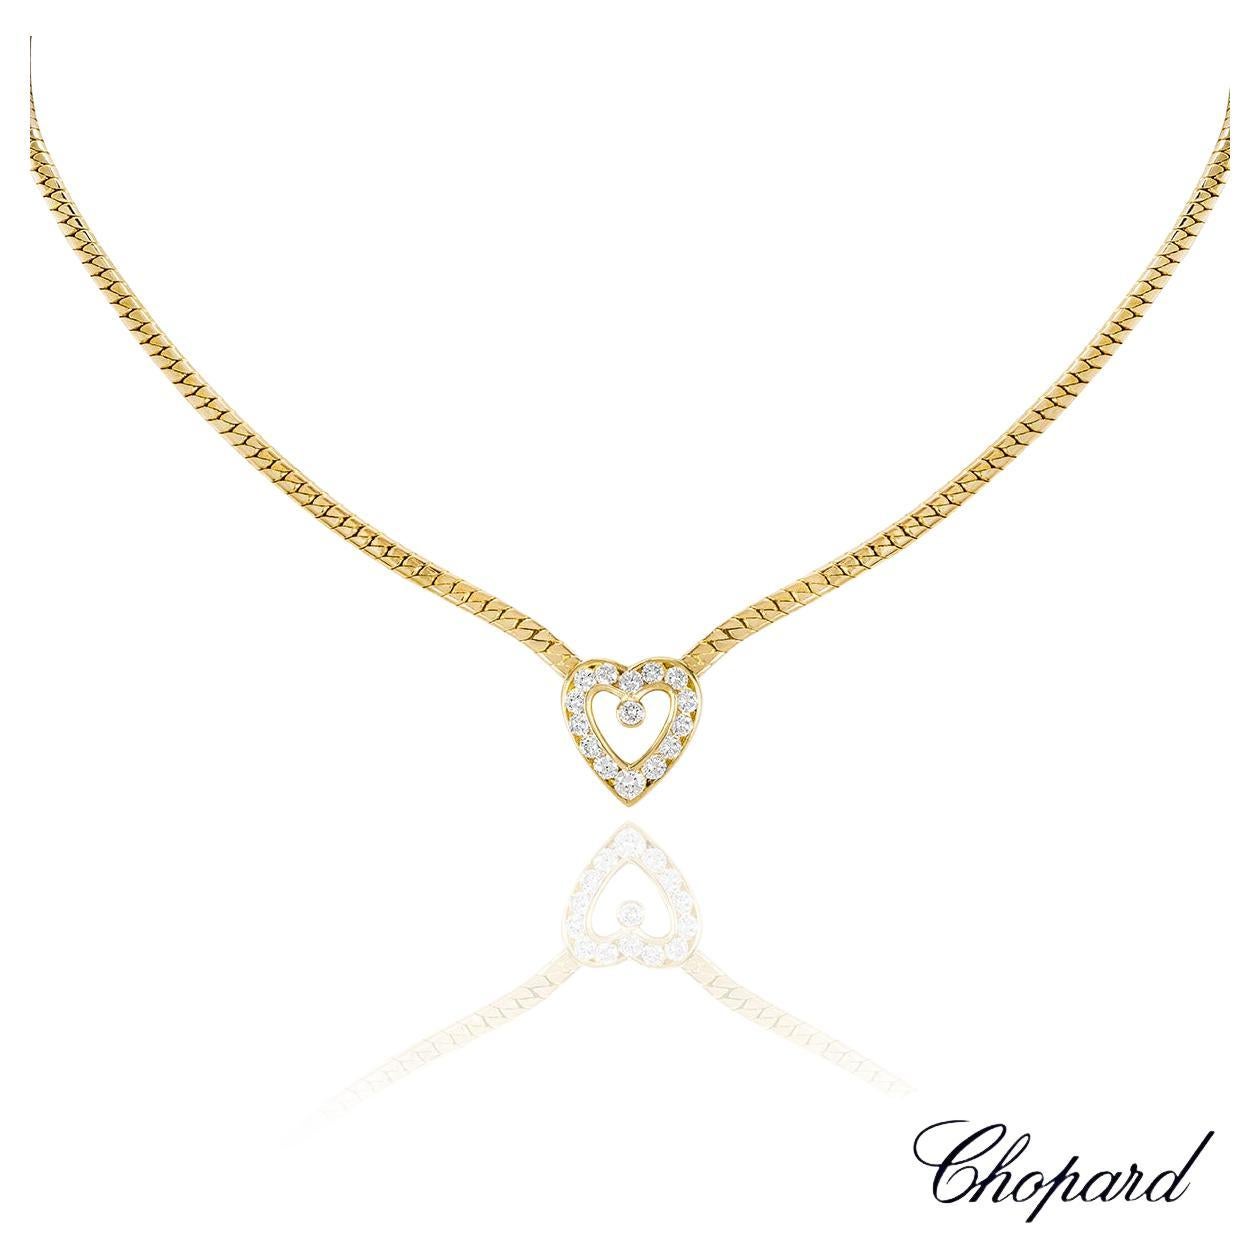 Chopard Yellow Gold Diamond Heart Necklace 0.94ct TDW